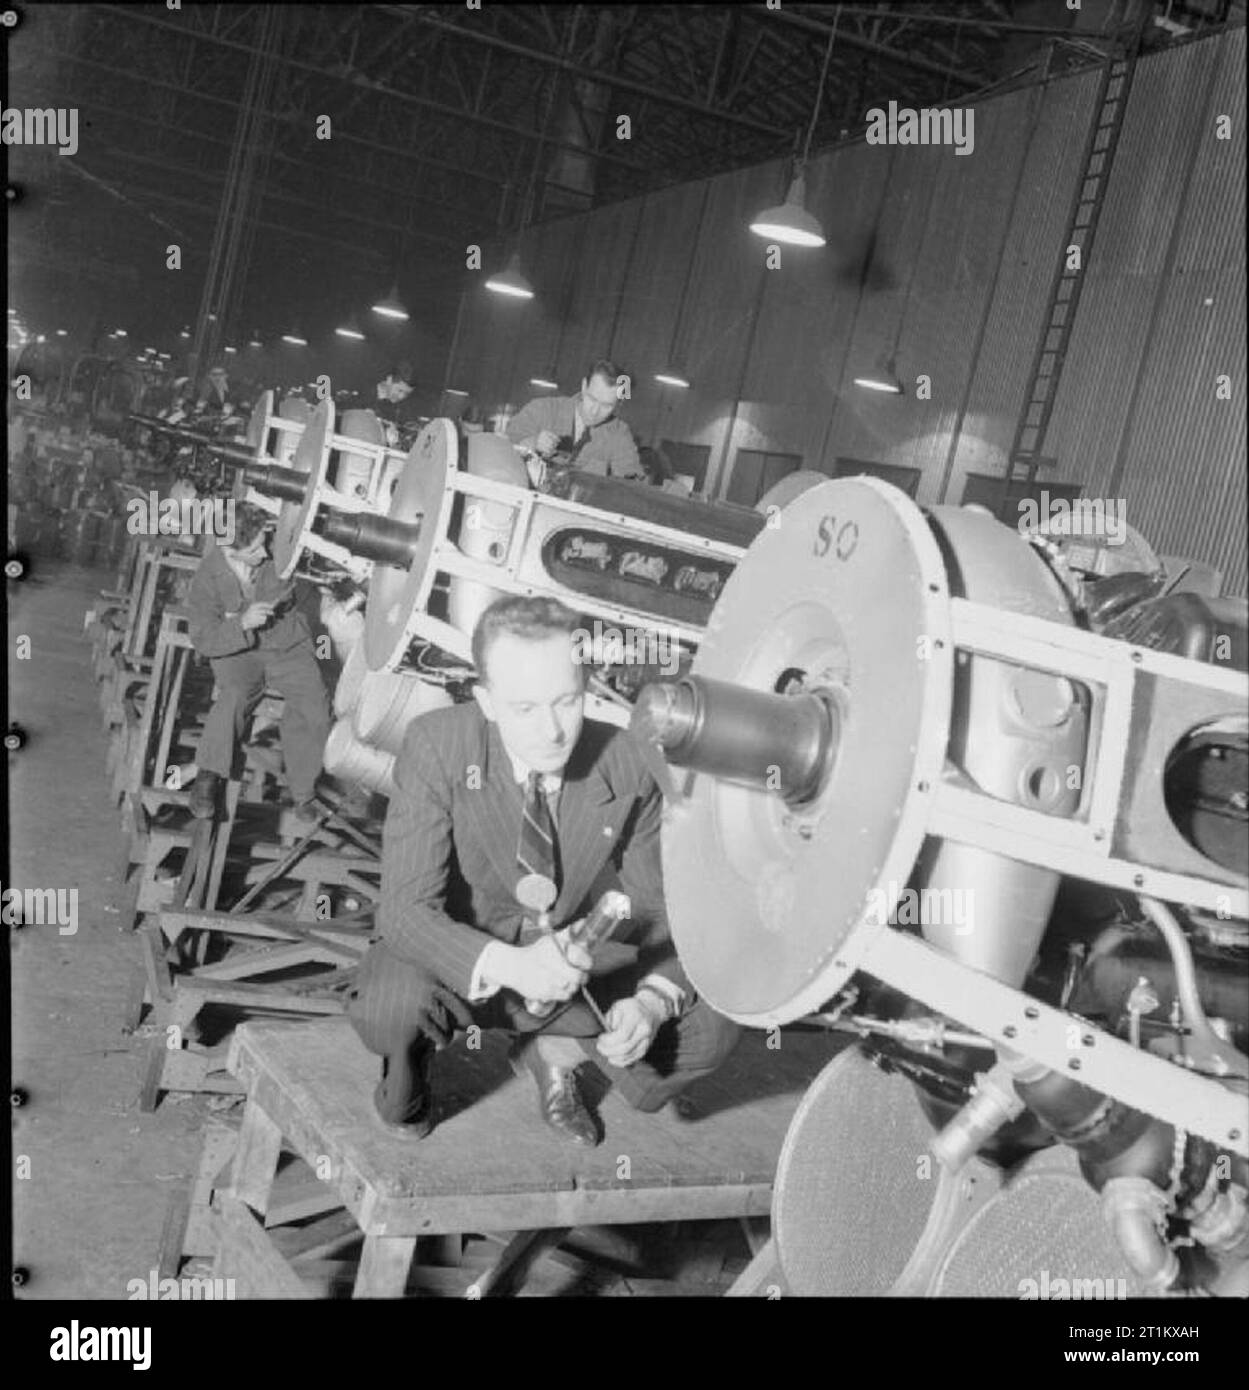 Birth of a Bomber- Aircraft Production in Britain, 1942 Men at work on a row of the propeller-end sections of engines for a Halifax bomber at the Handley Page factory in Cricklewood. The propellers themselves are not visible in the photograph. Stock Photo